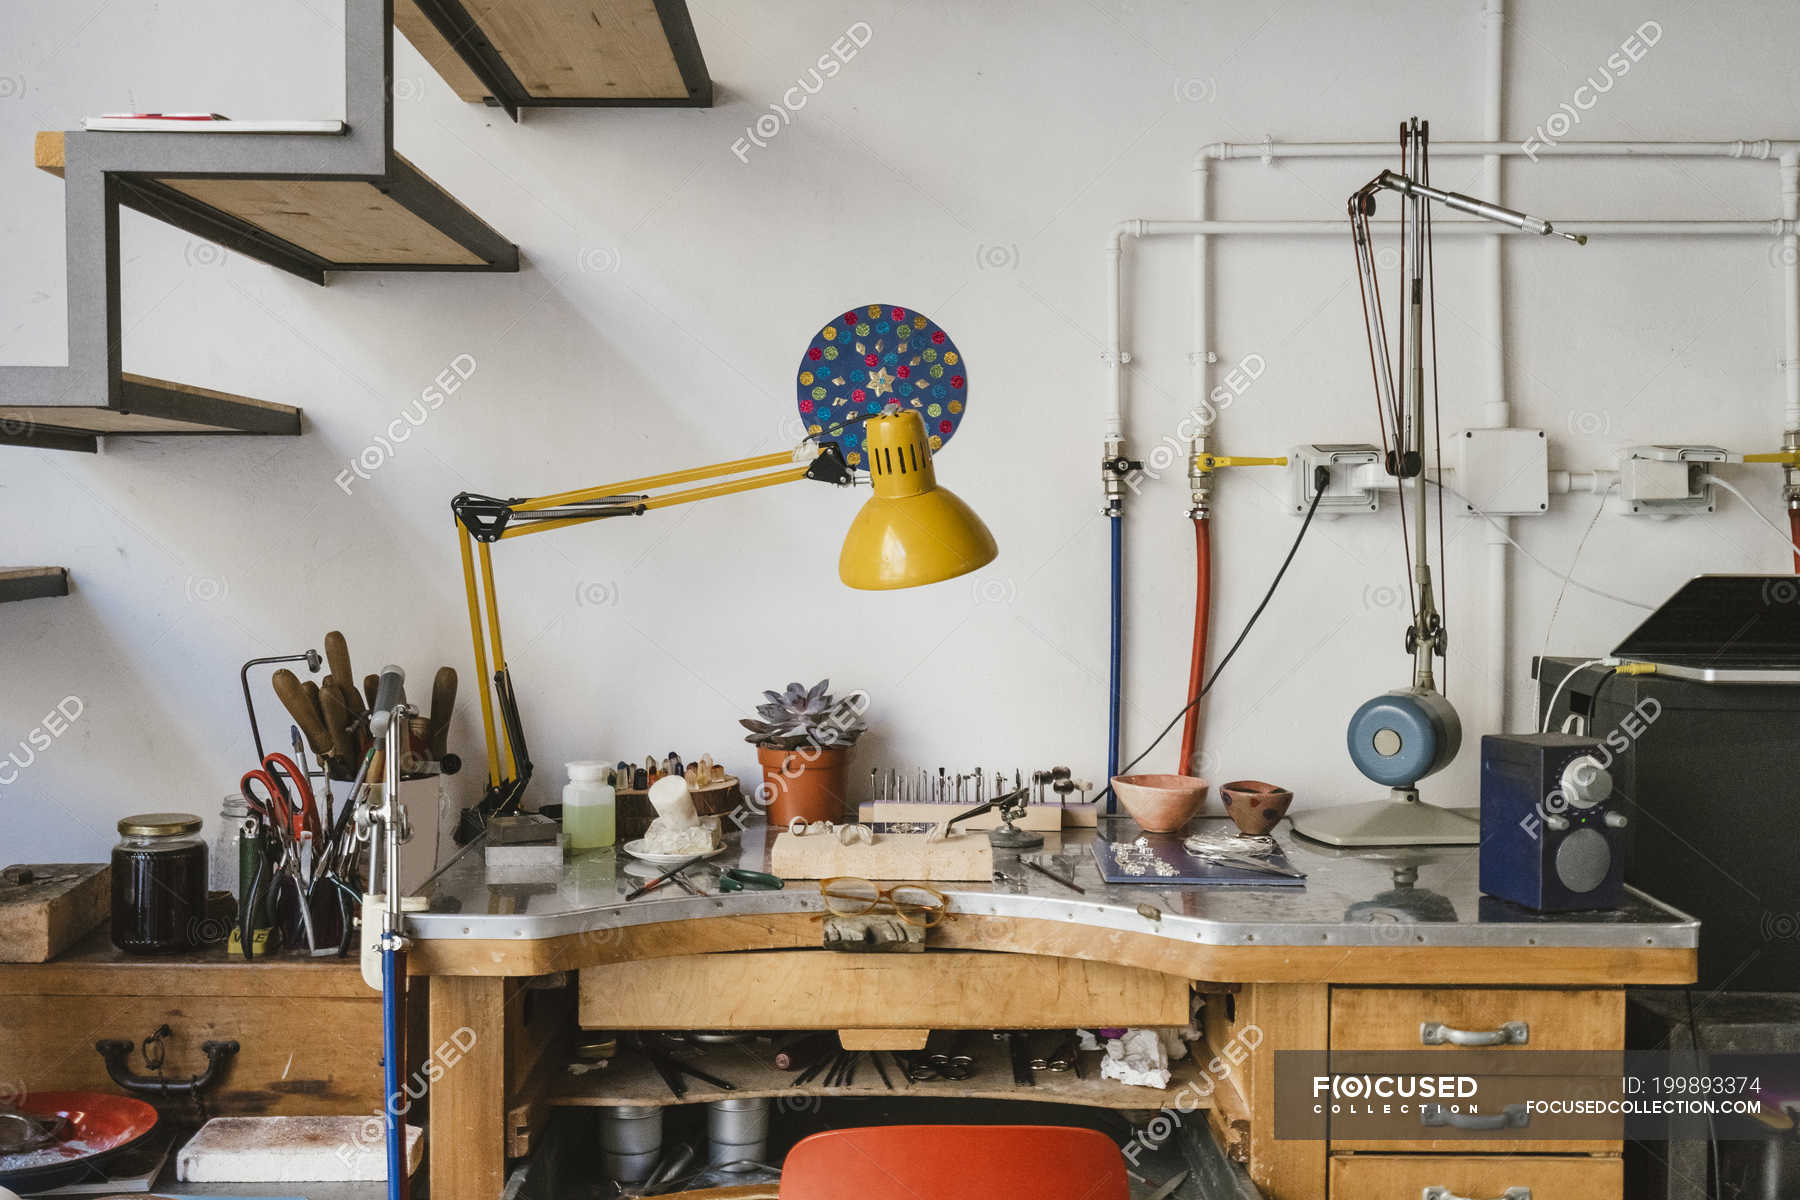 Jewellery Making Equipment And Tools On Jewellery Workshop